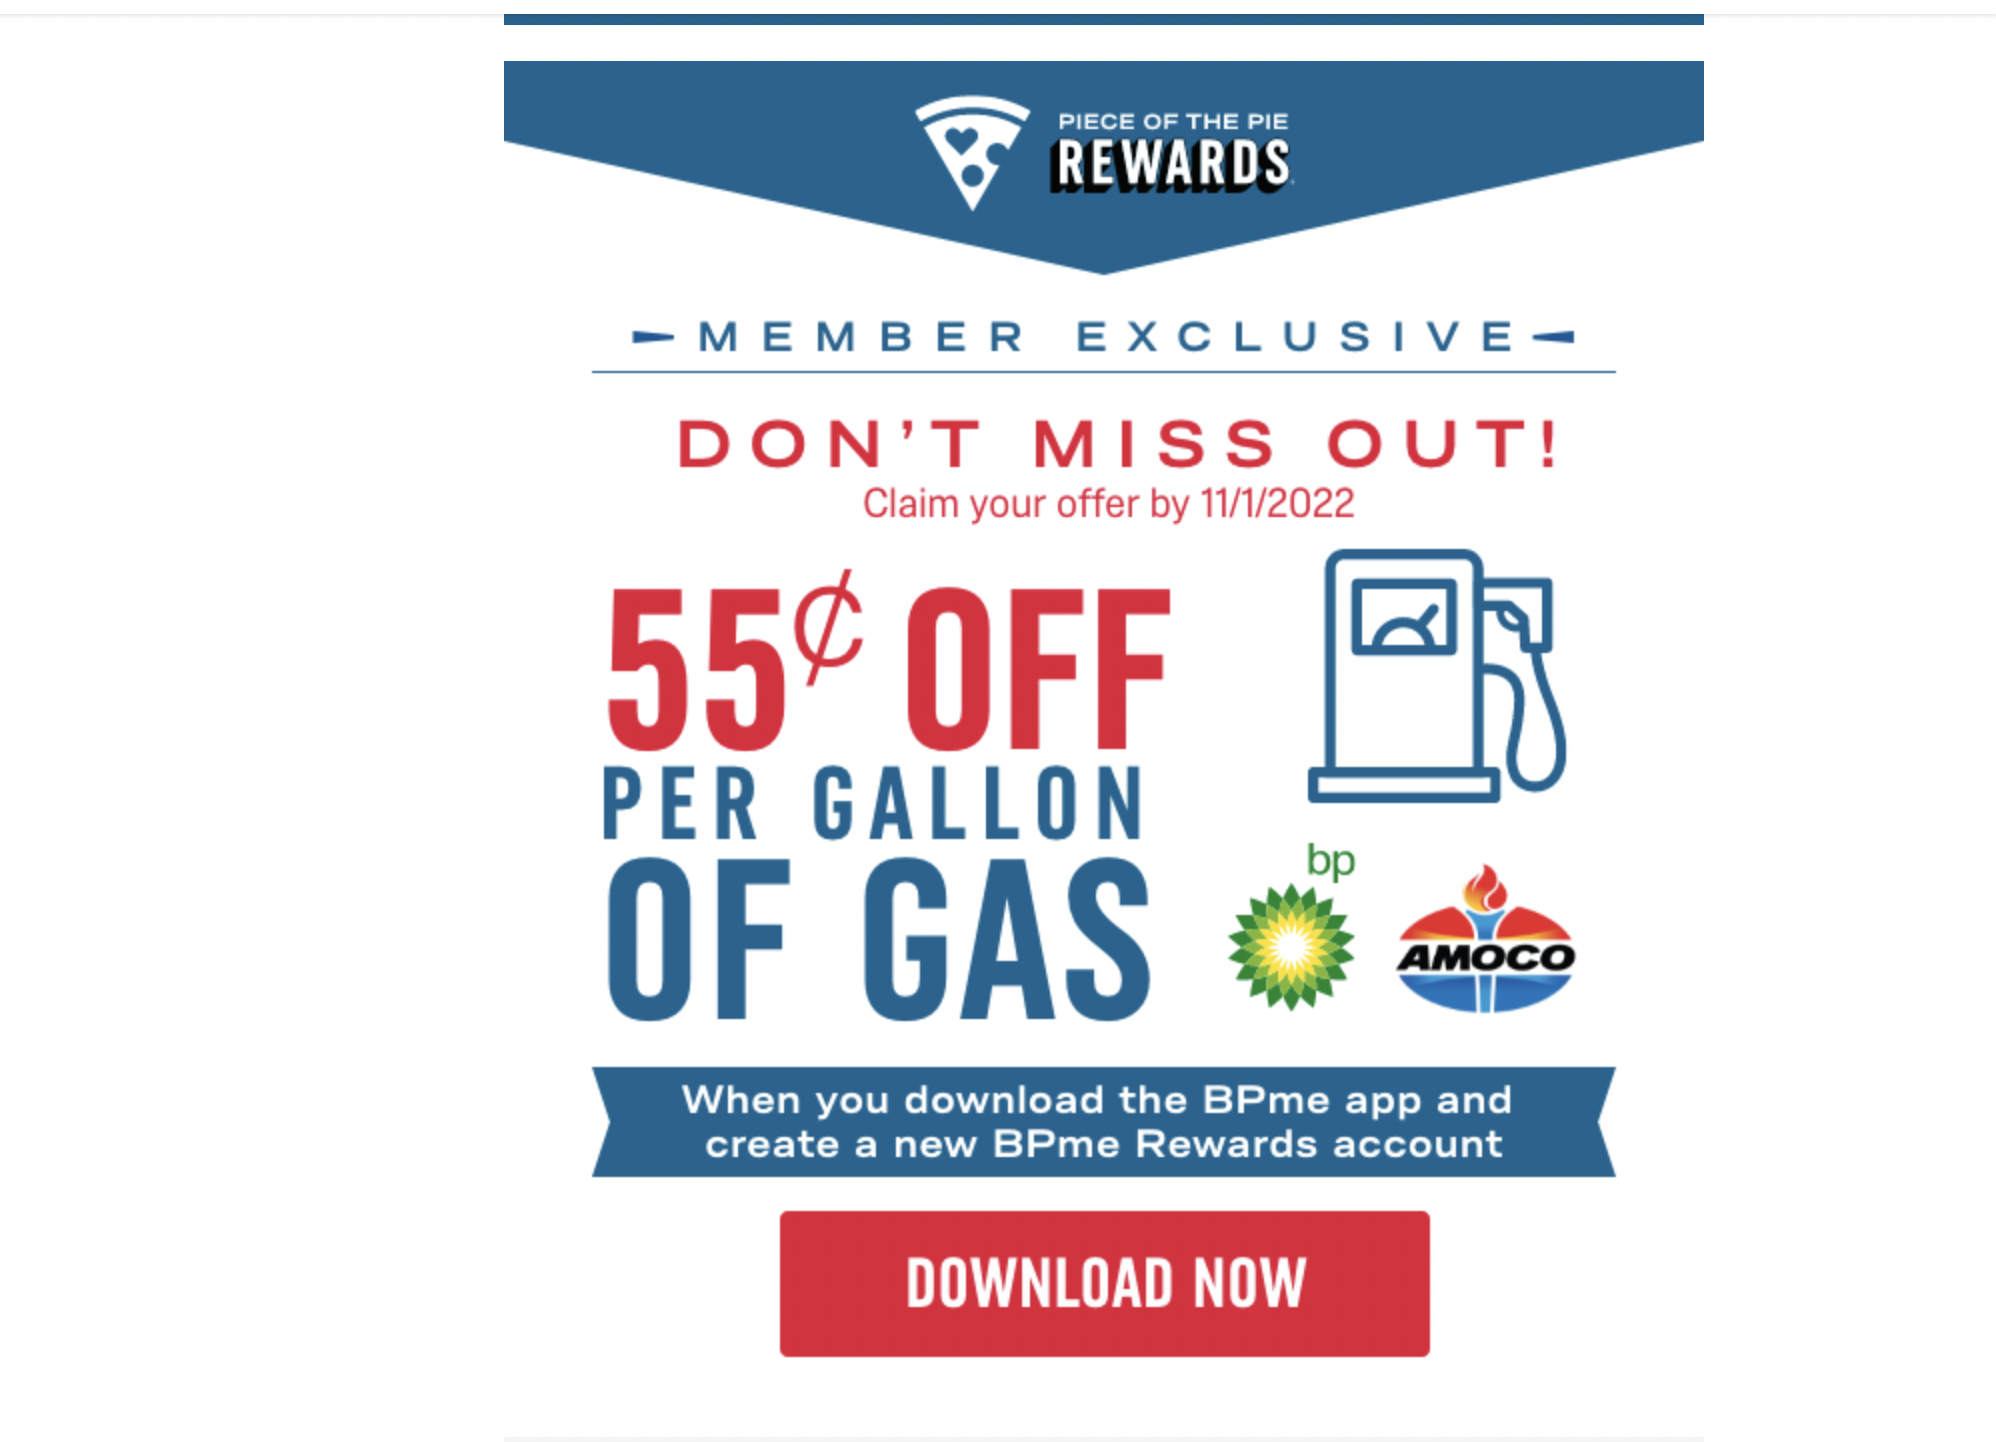 55c off on GAS for dominos rewards members $0.55